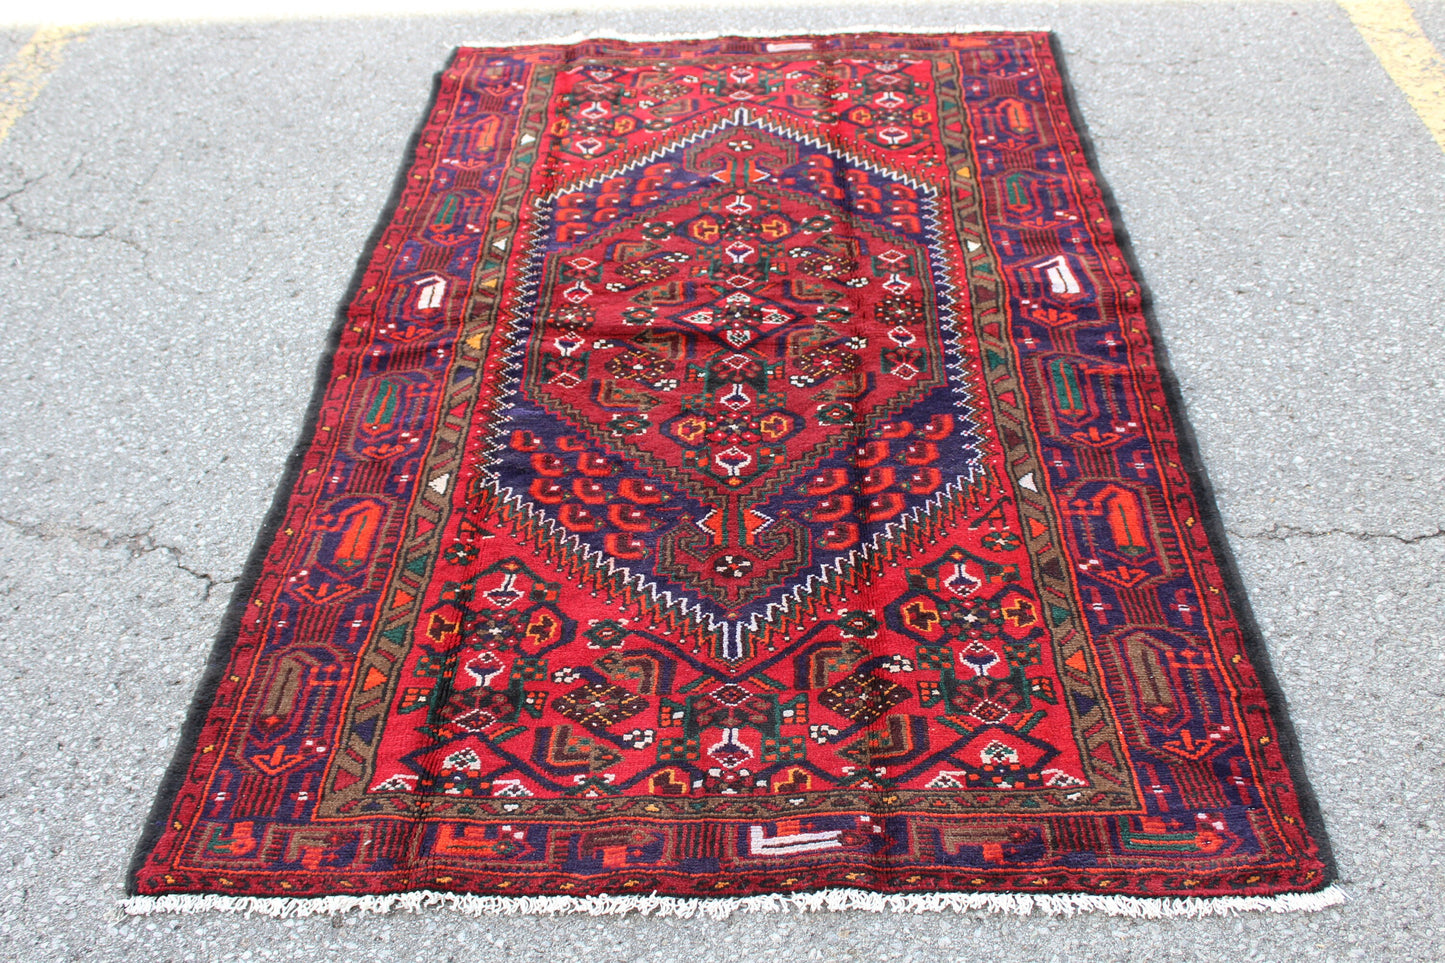 Red 4x6 Hand Knotted Rug with Navy Blue Persian Tribal Designs